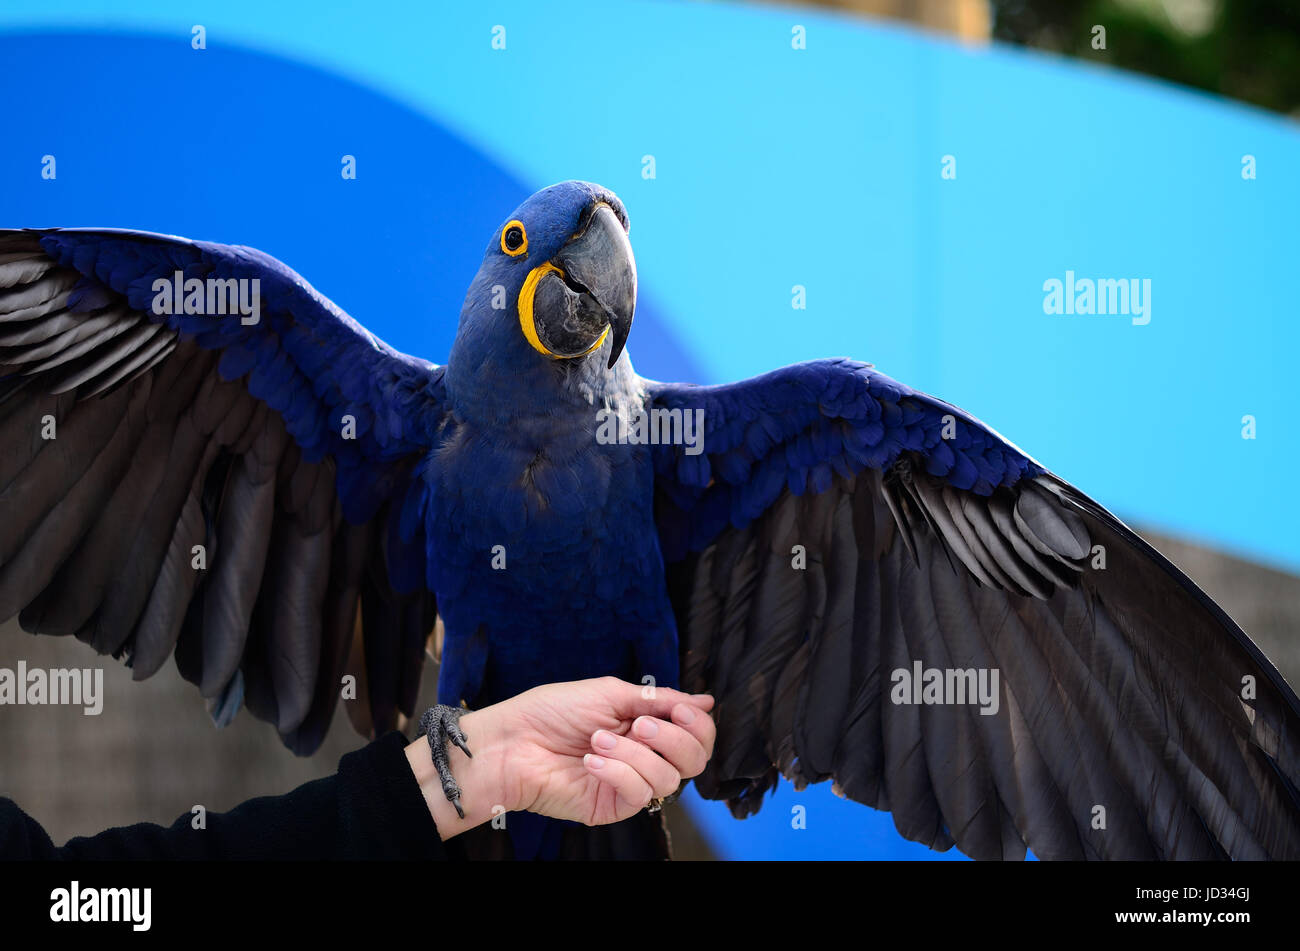 cheerful blue macaw showing off and spreading its wings on a trainer's hand Stock Photo